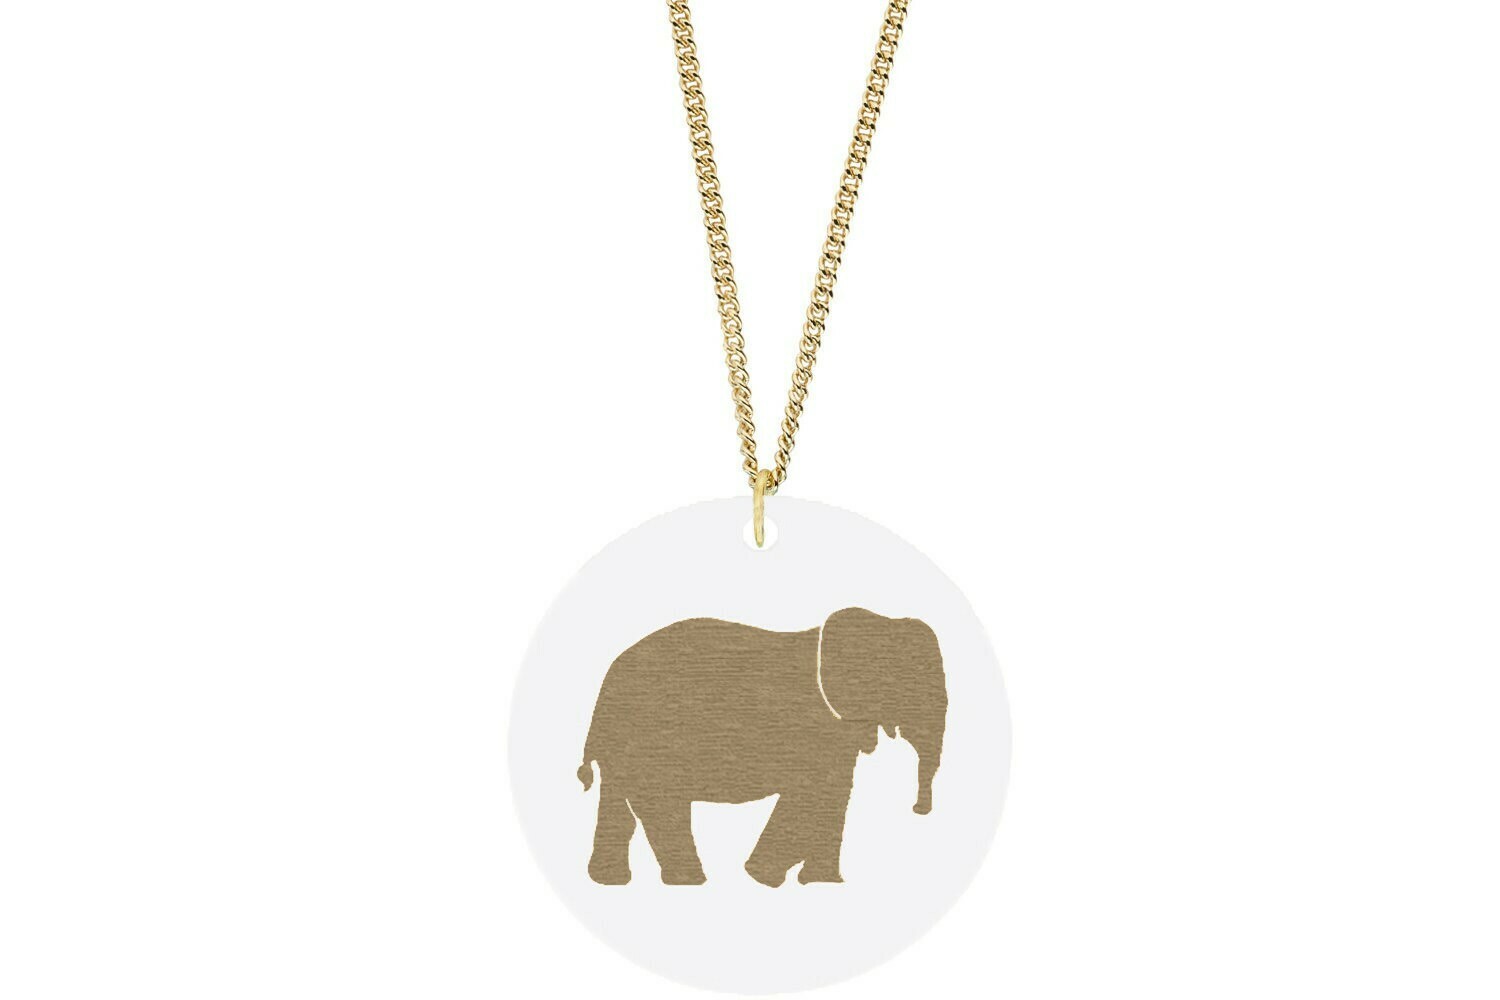 Elephant Pendant Subtle Style Refined with Paint on Chain Necklace